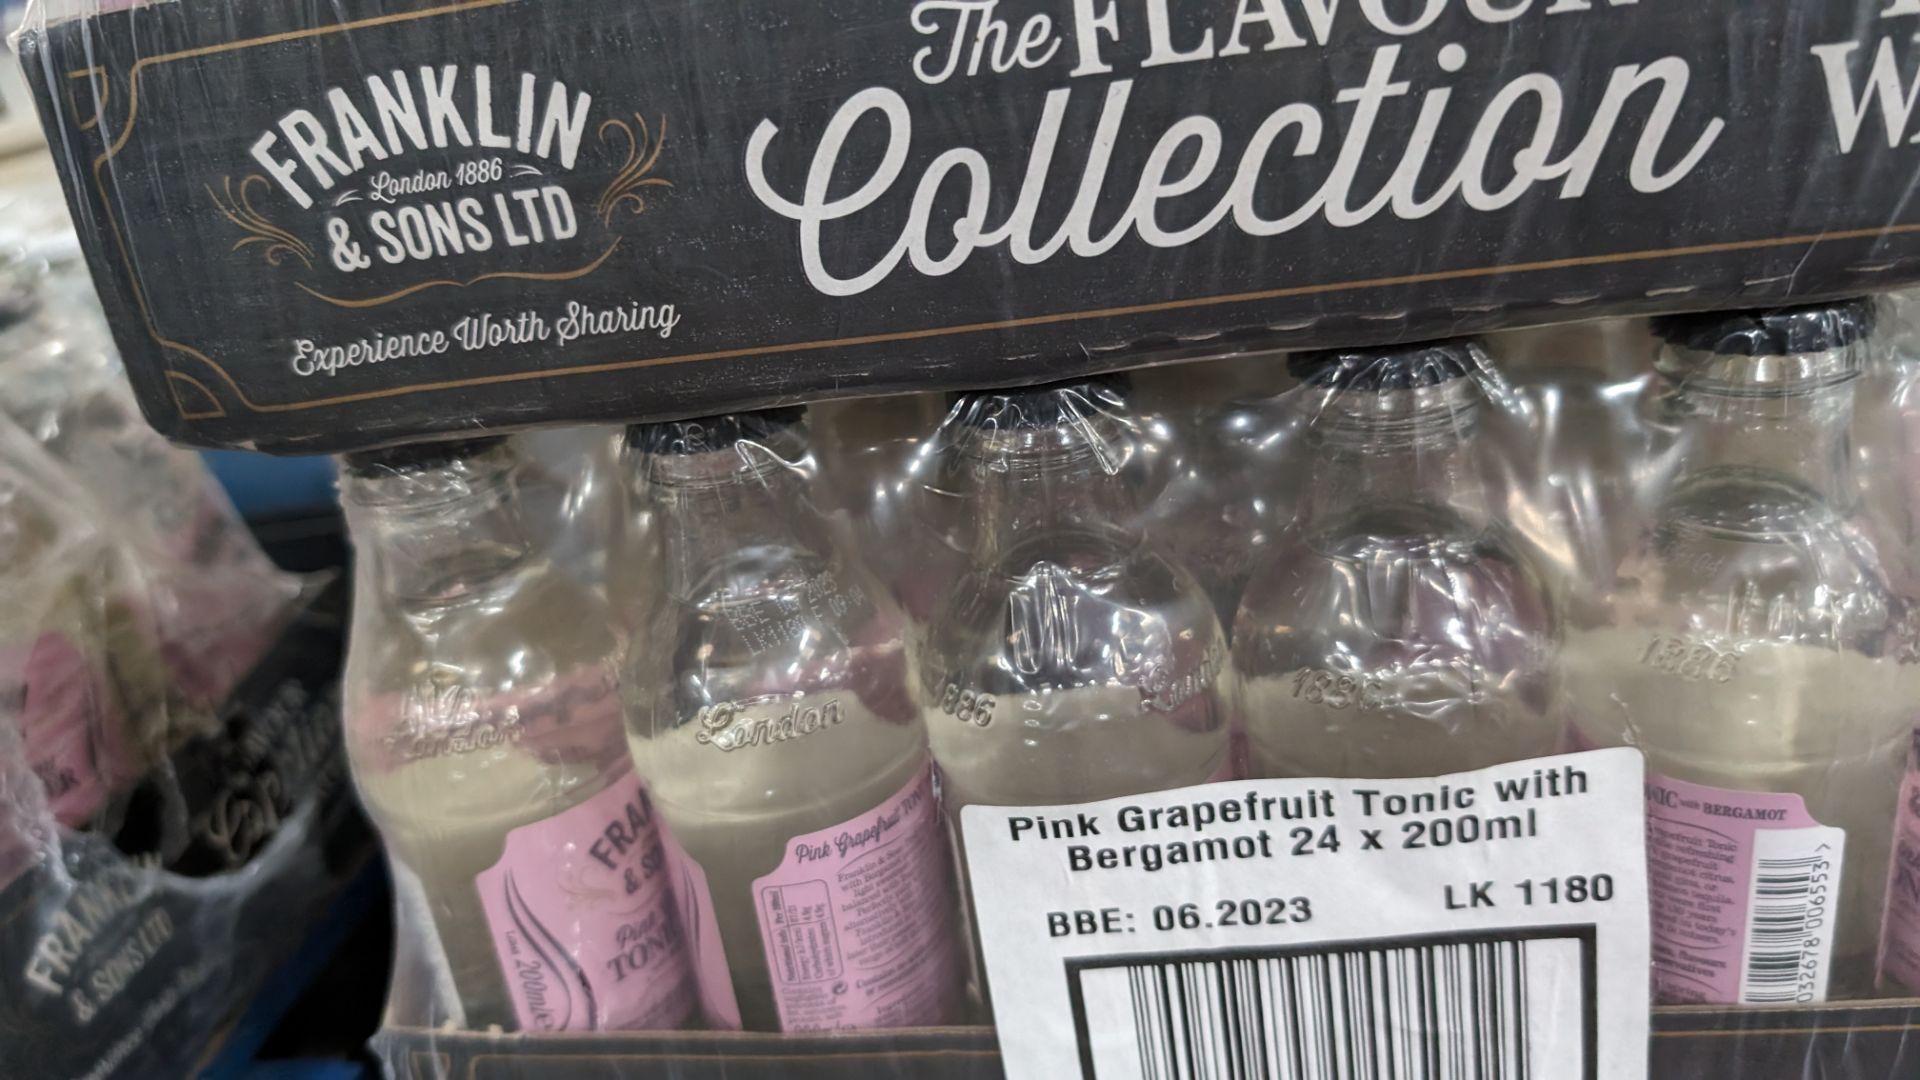 12 trays of Franklin & Sons Ltd tonics and mixers - typical best before date 2022 - Image 8 of 10